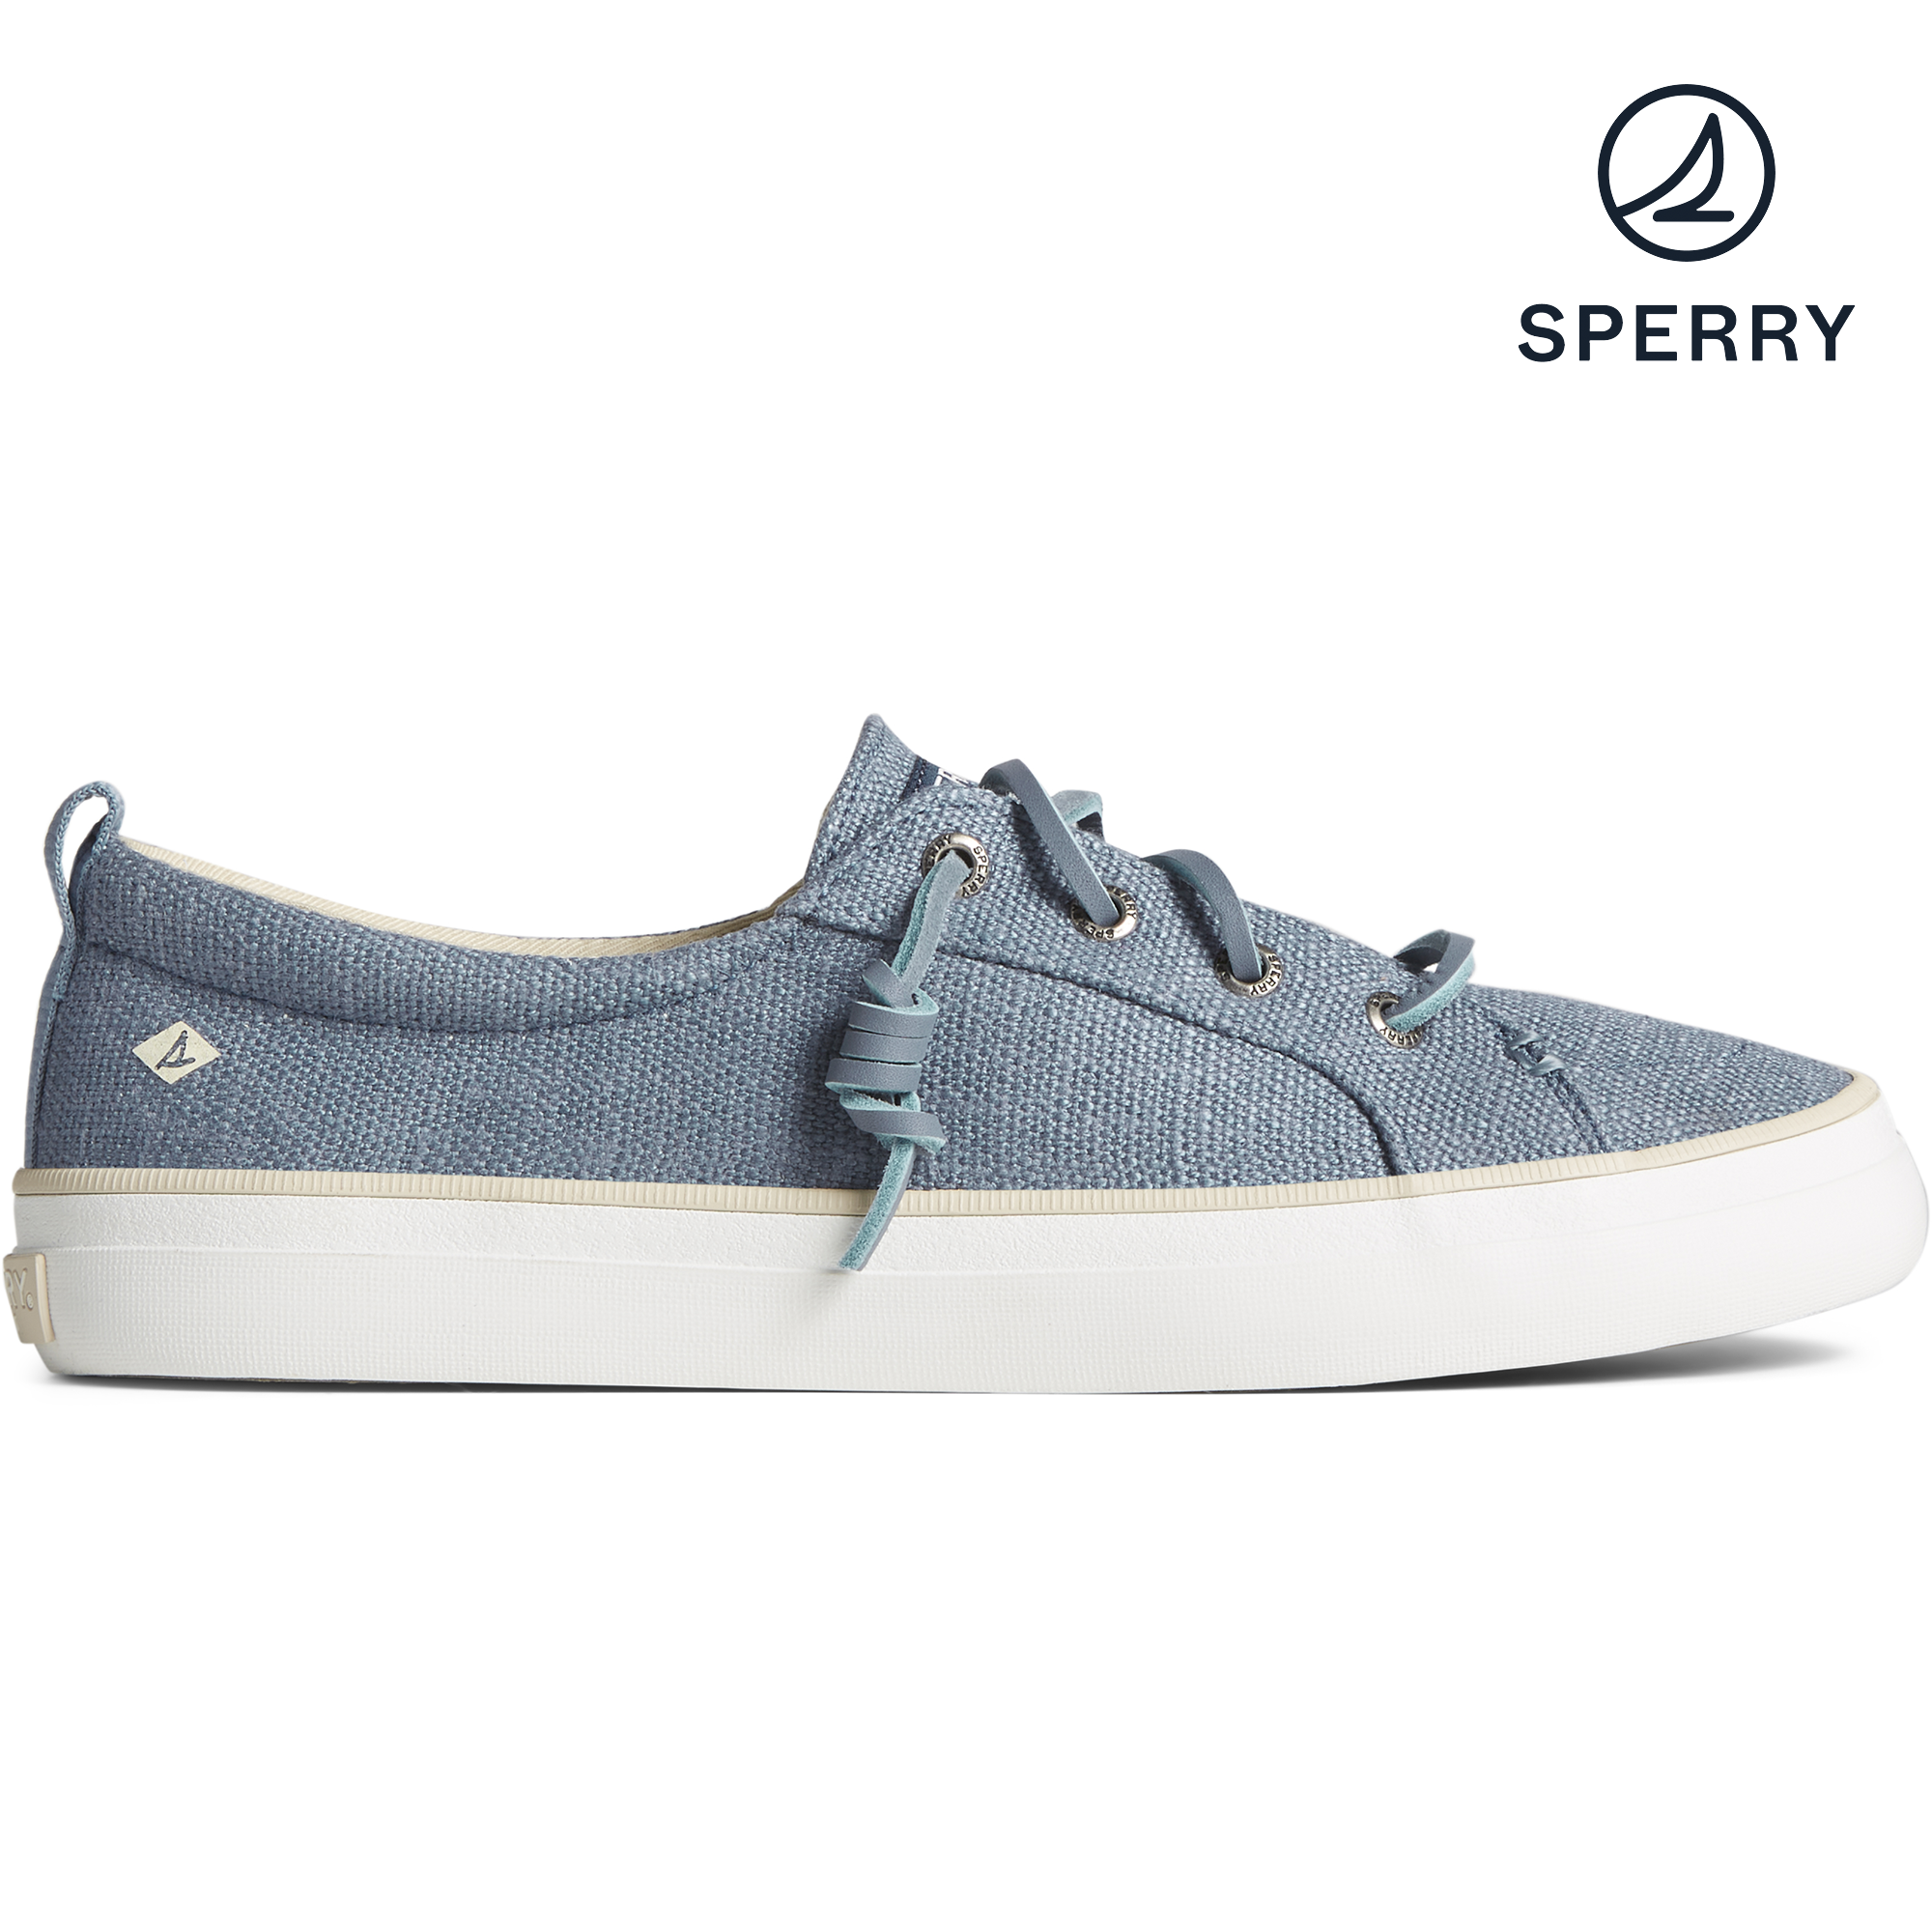 Women's hemp sneakers made by physiotherapists [Free Exchange]